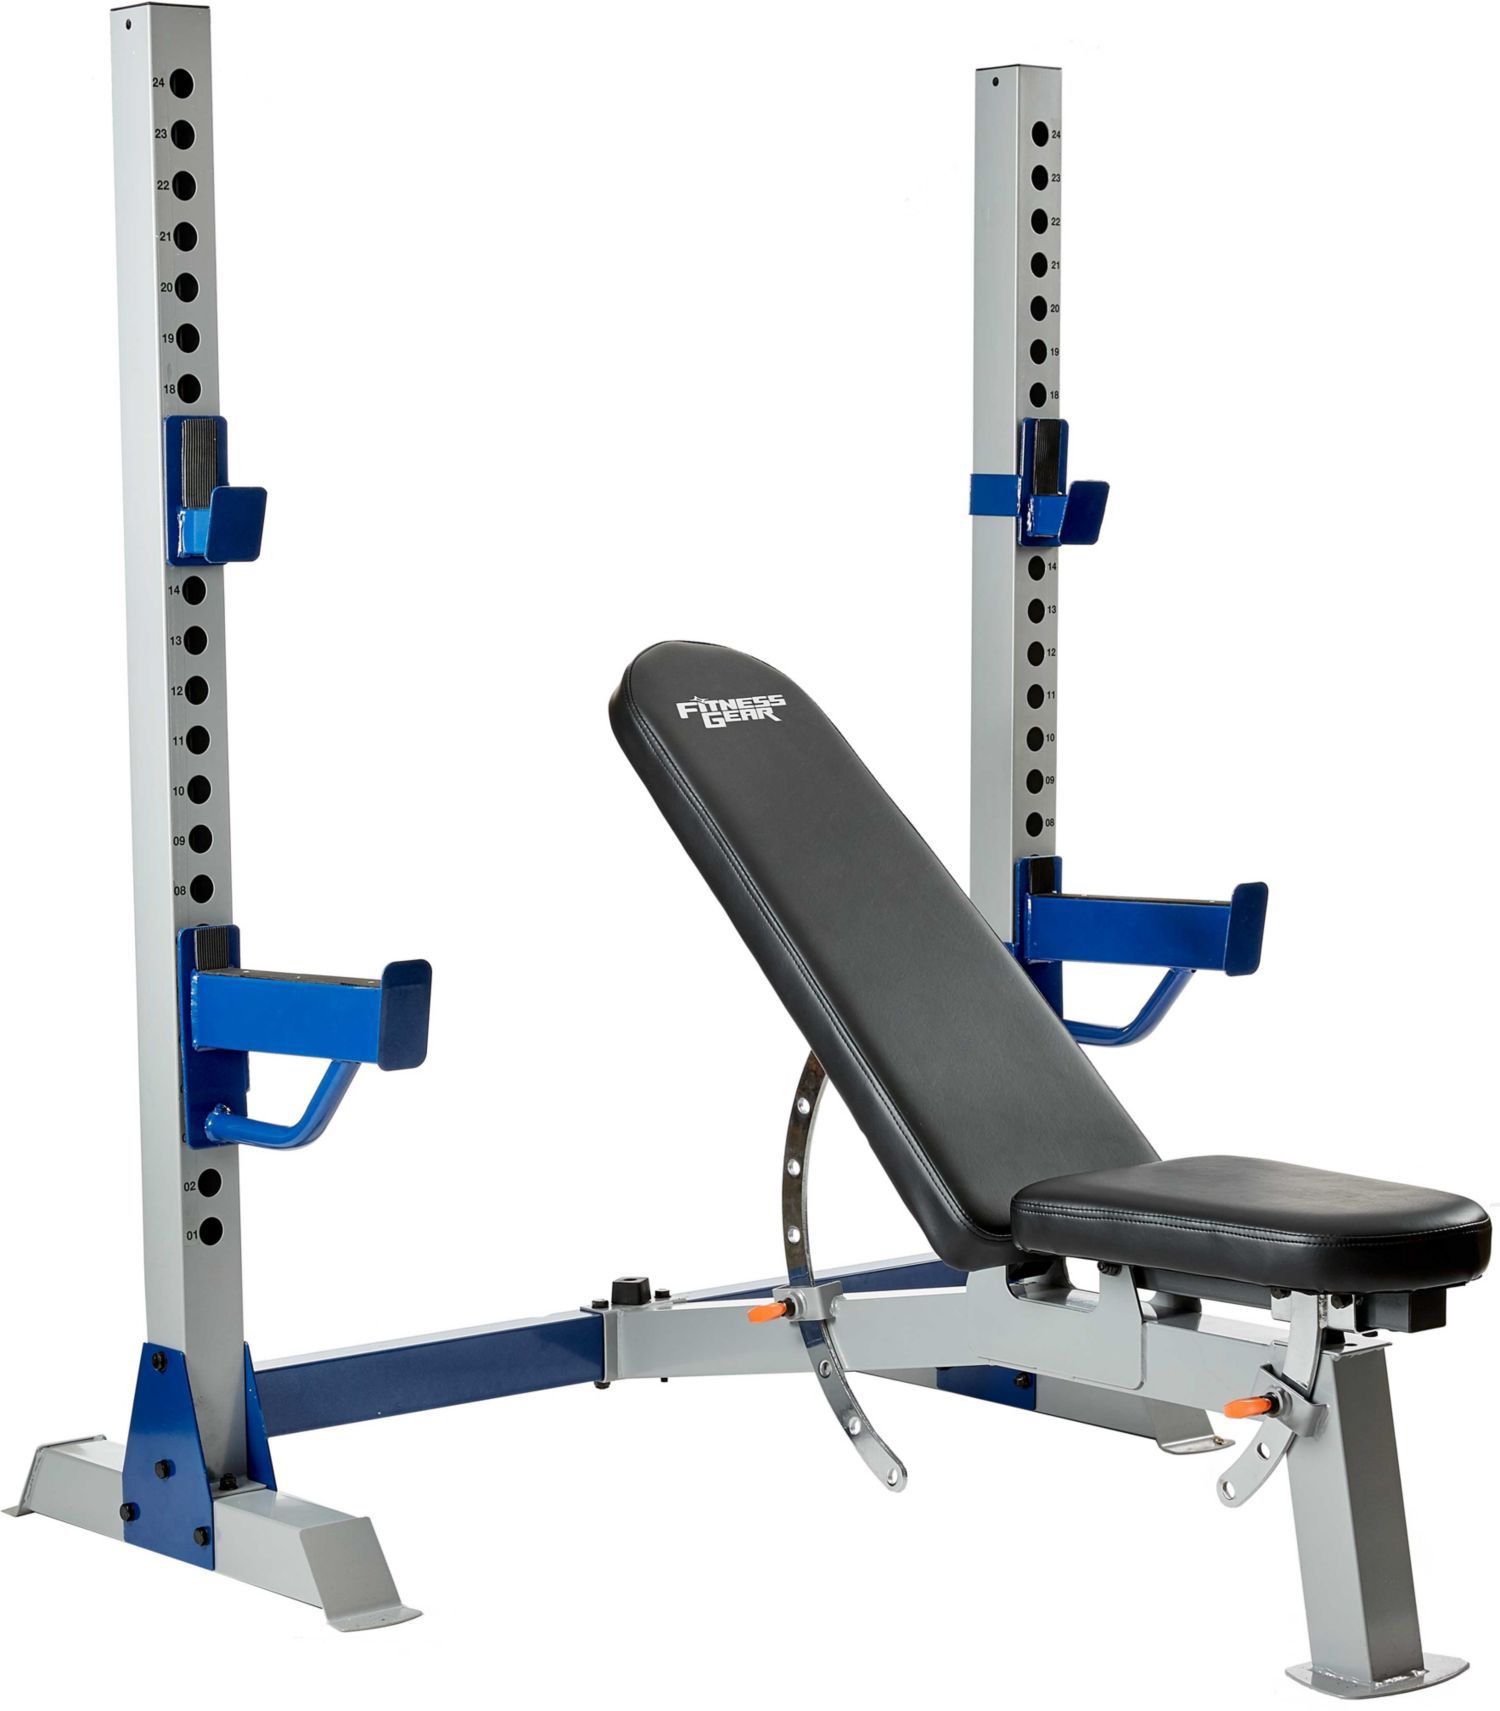 Fitness gear pro 0B|600 bench and weights!